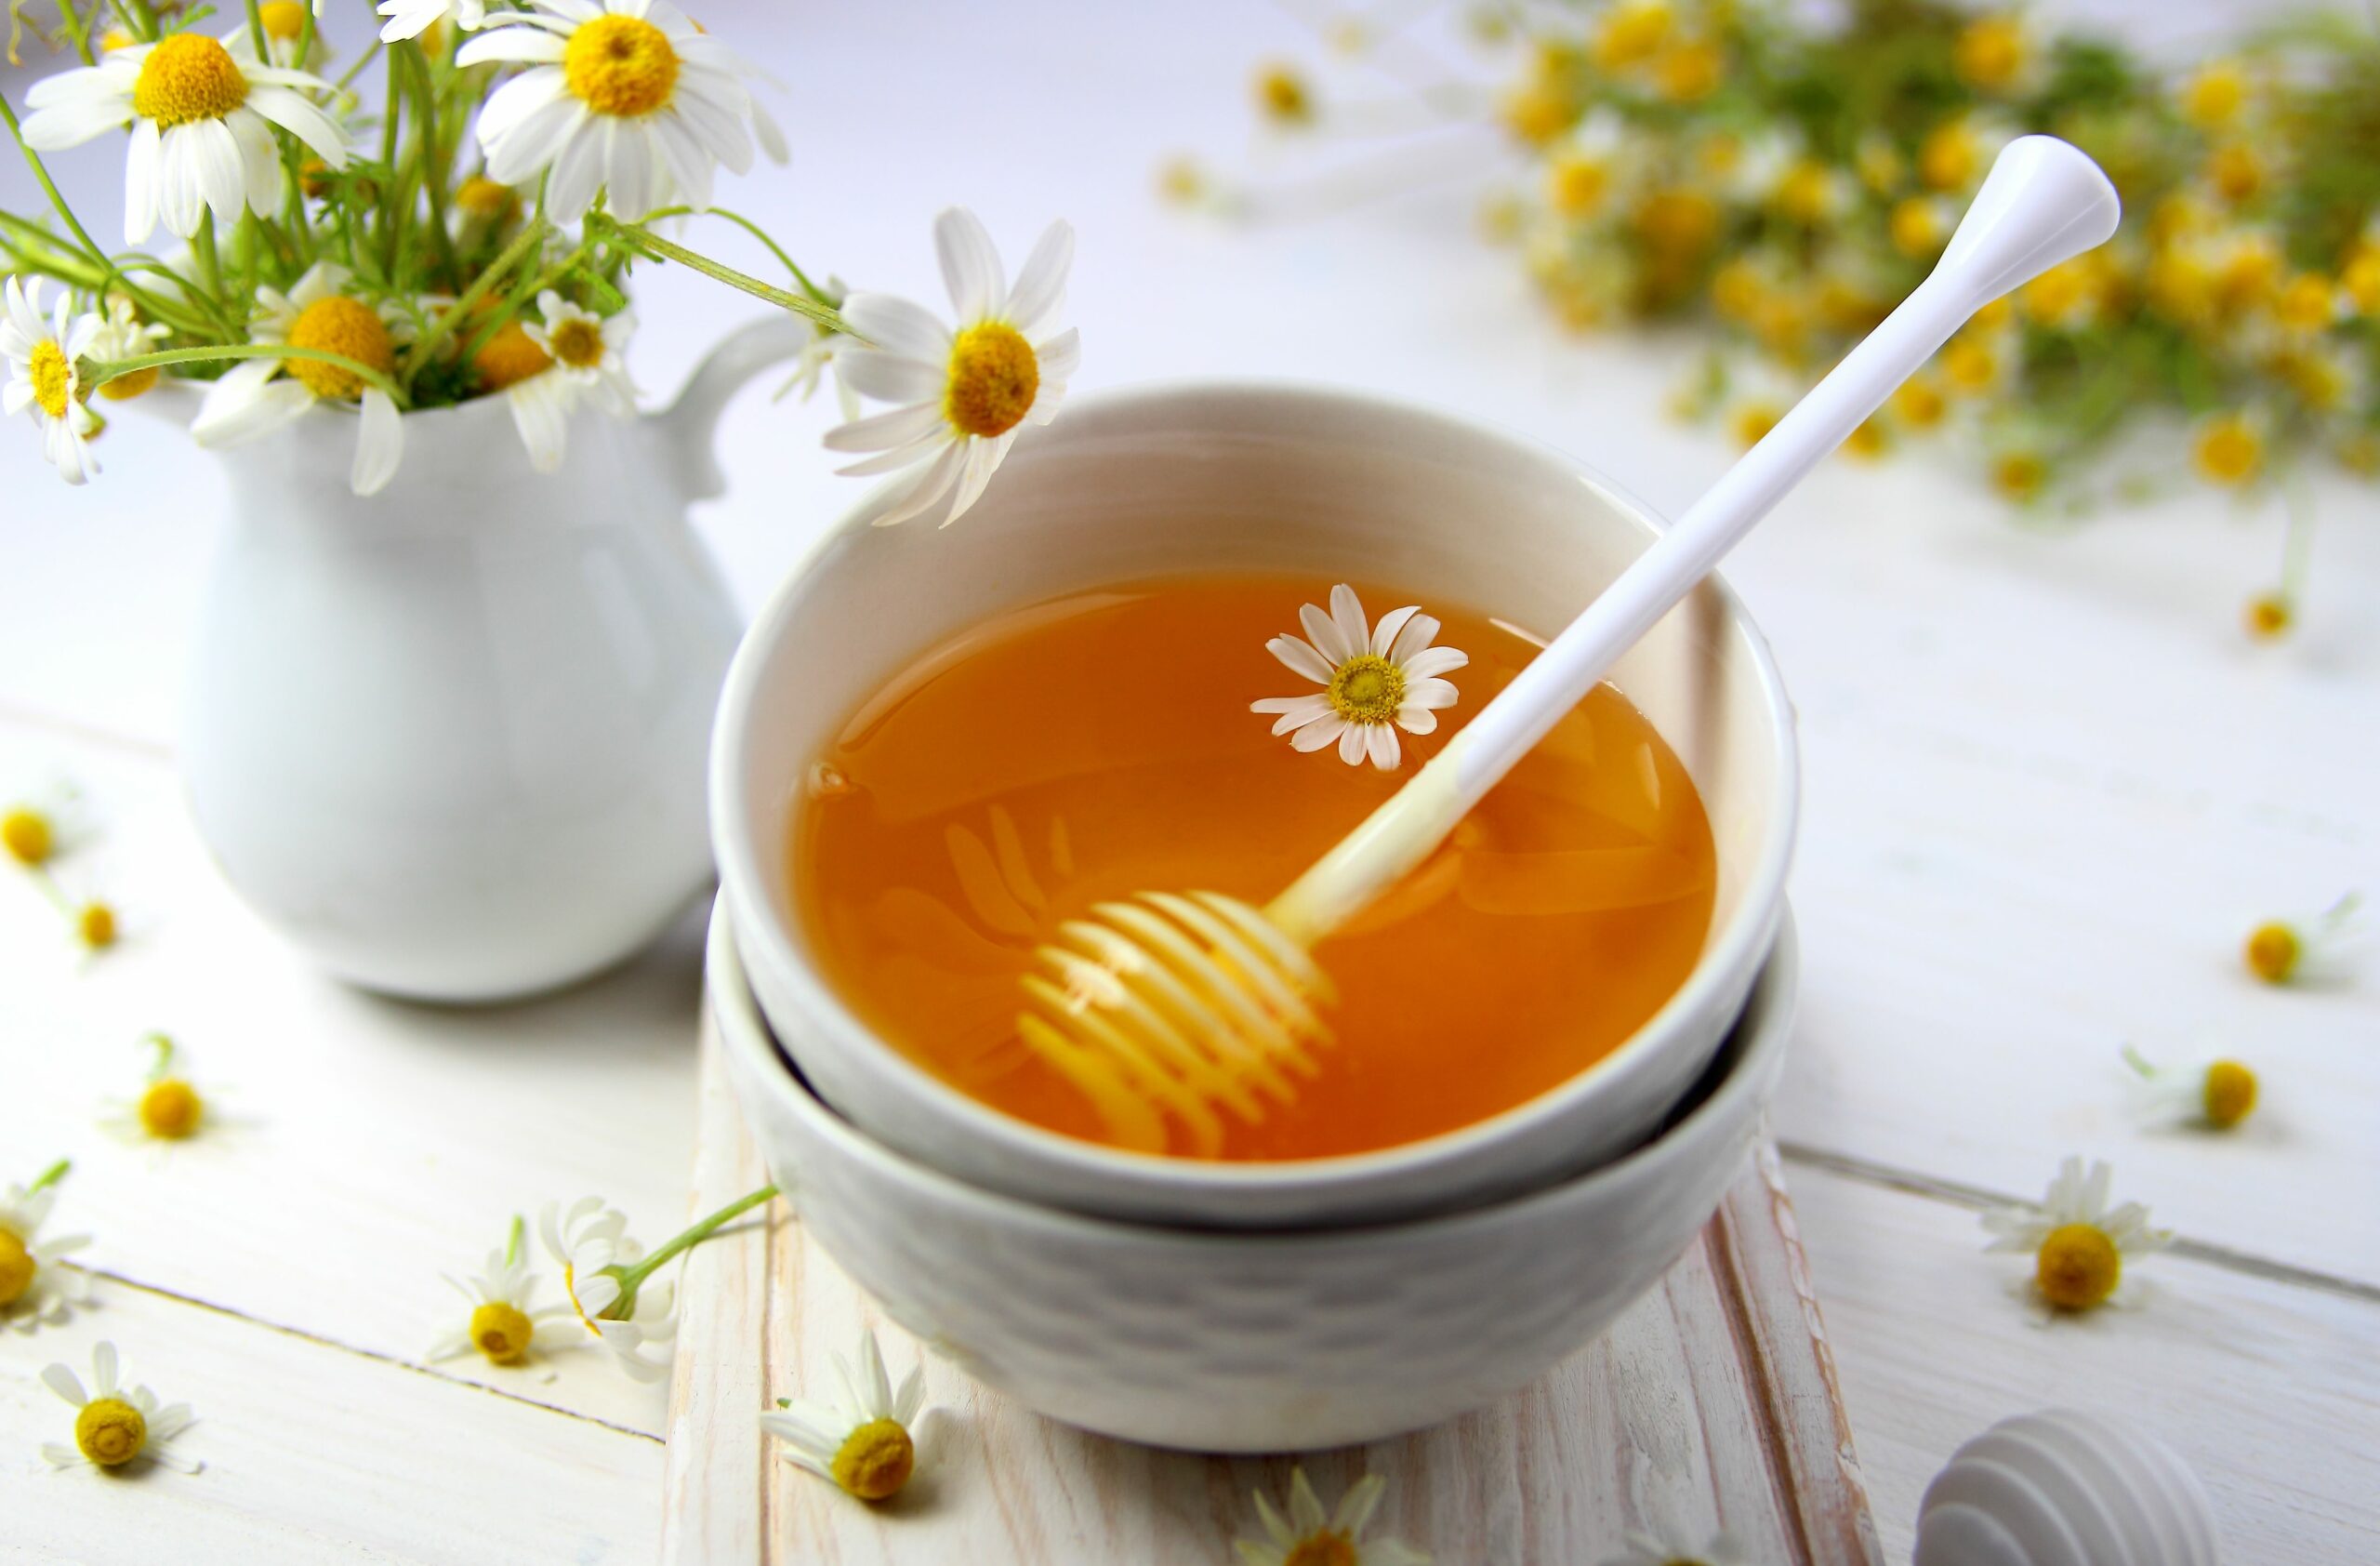 A bowl of honey with honey dipper and a vase of daisies.